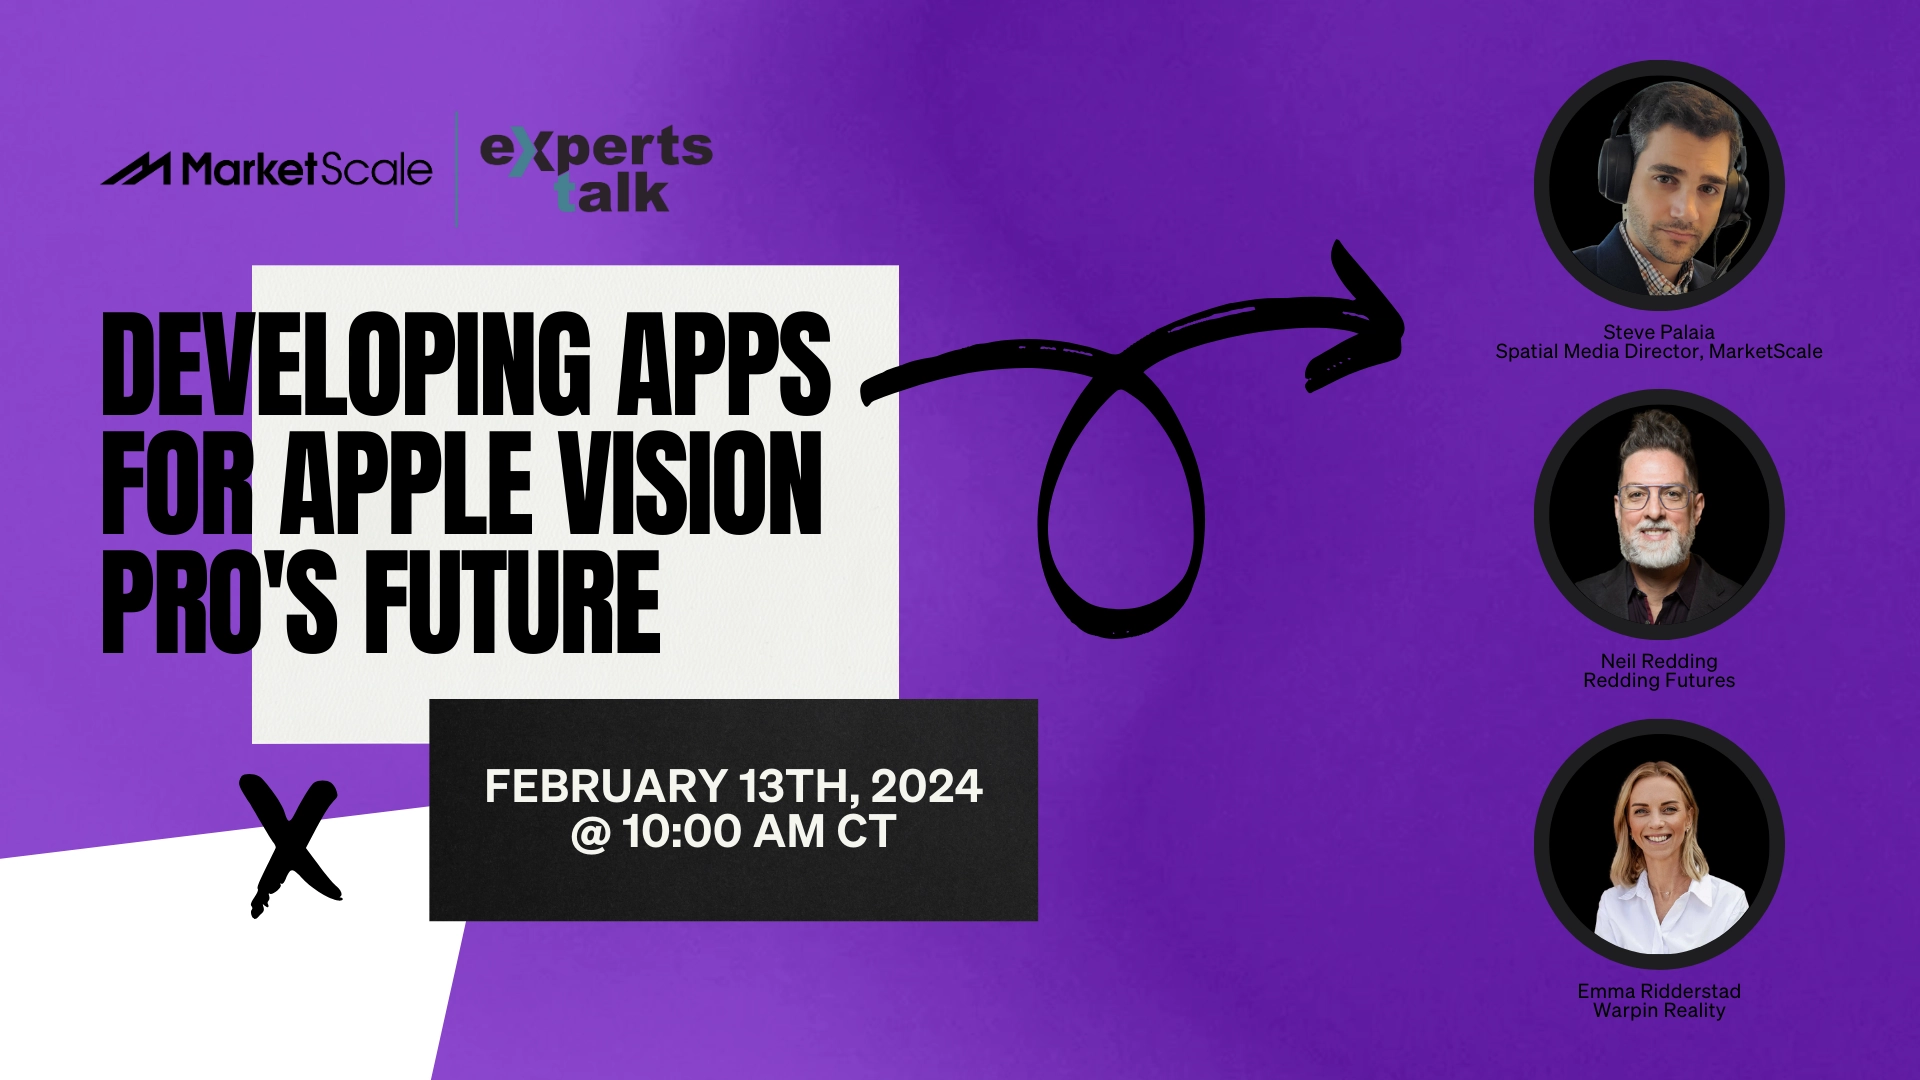 Navigating the Future of Work, Play, and App Development in the Apple Vision Pro Era